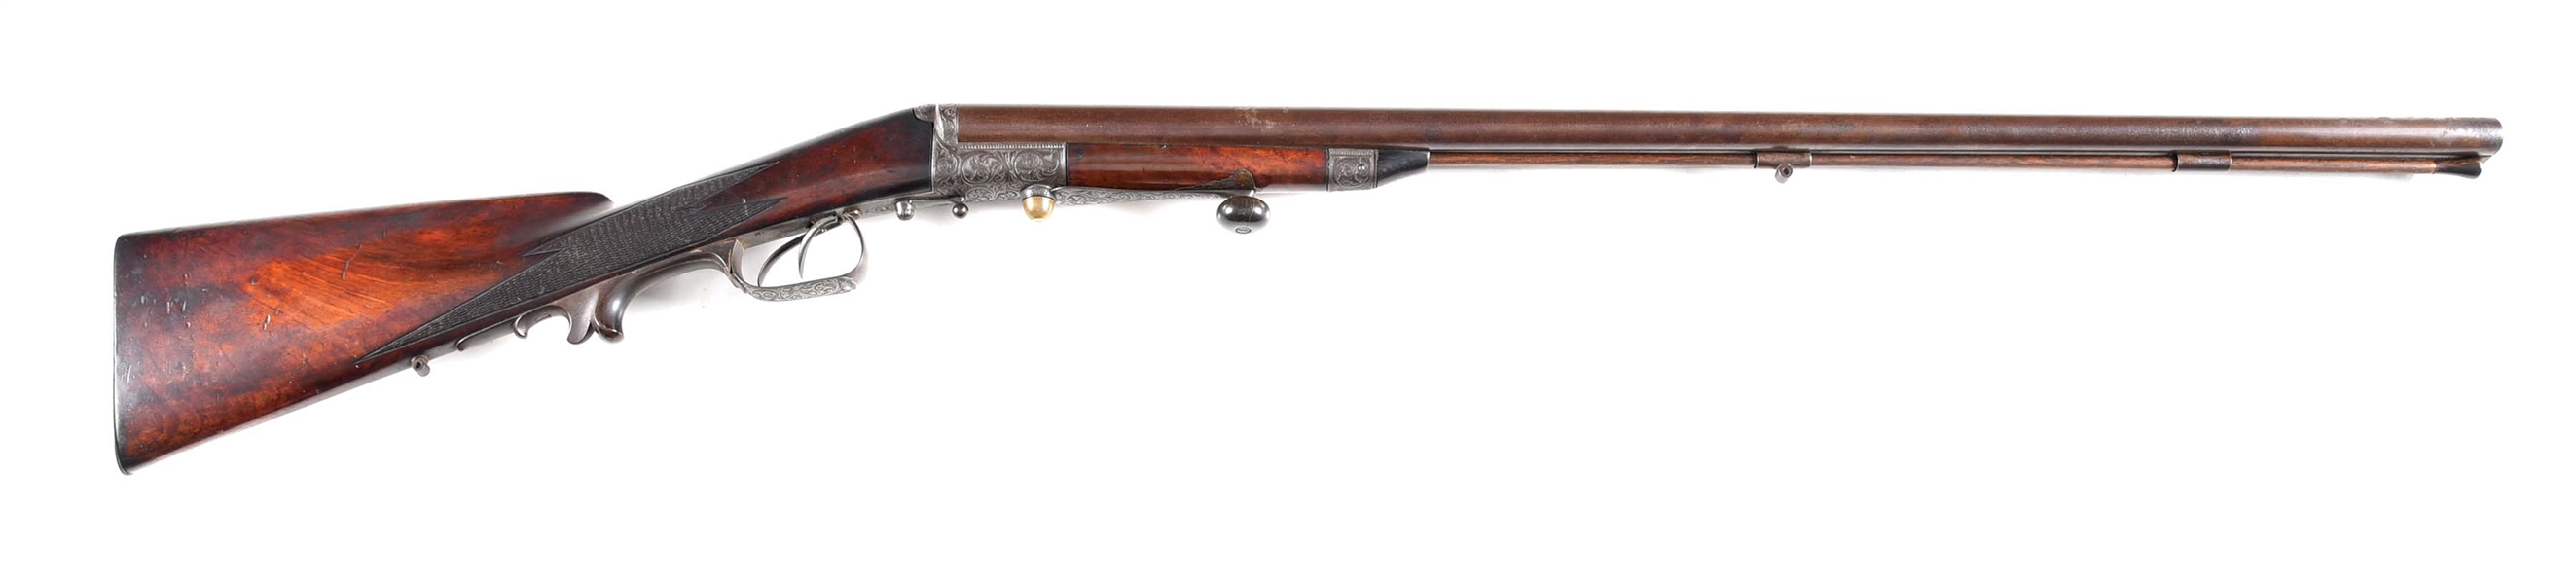 (A) HISTORICALLY IMPORTANT ROENNE ROTARY LEVER 12 GAUGE SHOTGUN, PART OF THE CONVERSION FROM PERCUSSION TO BREECHLOADER.